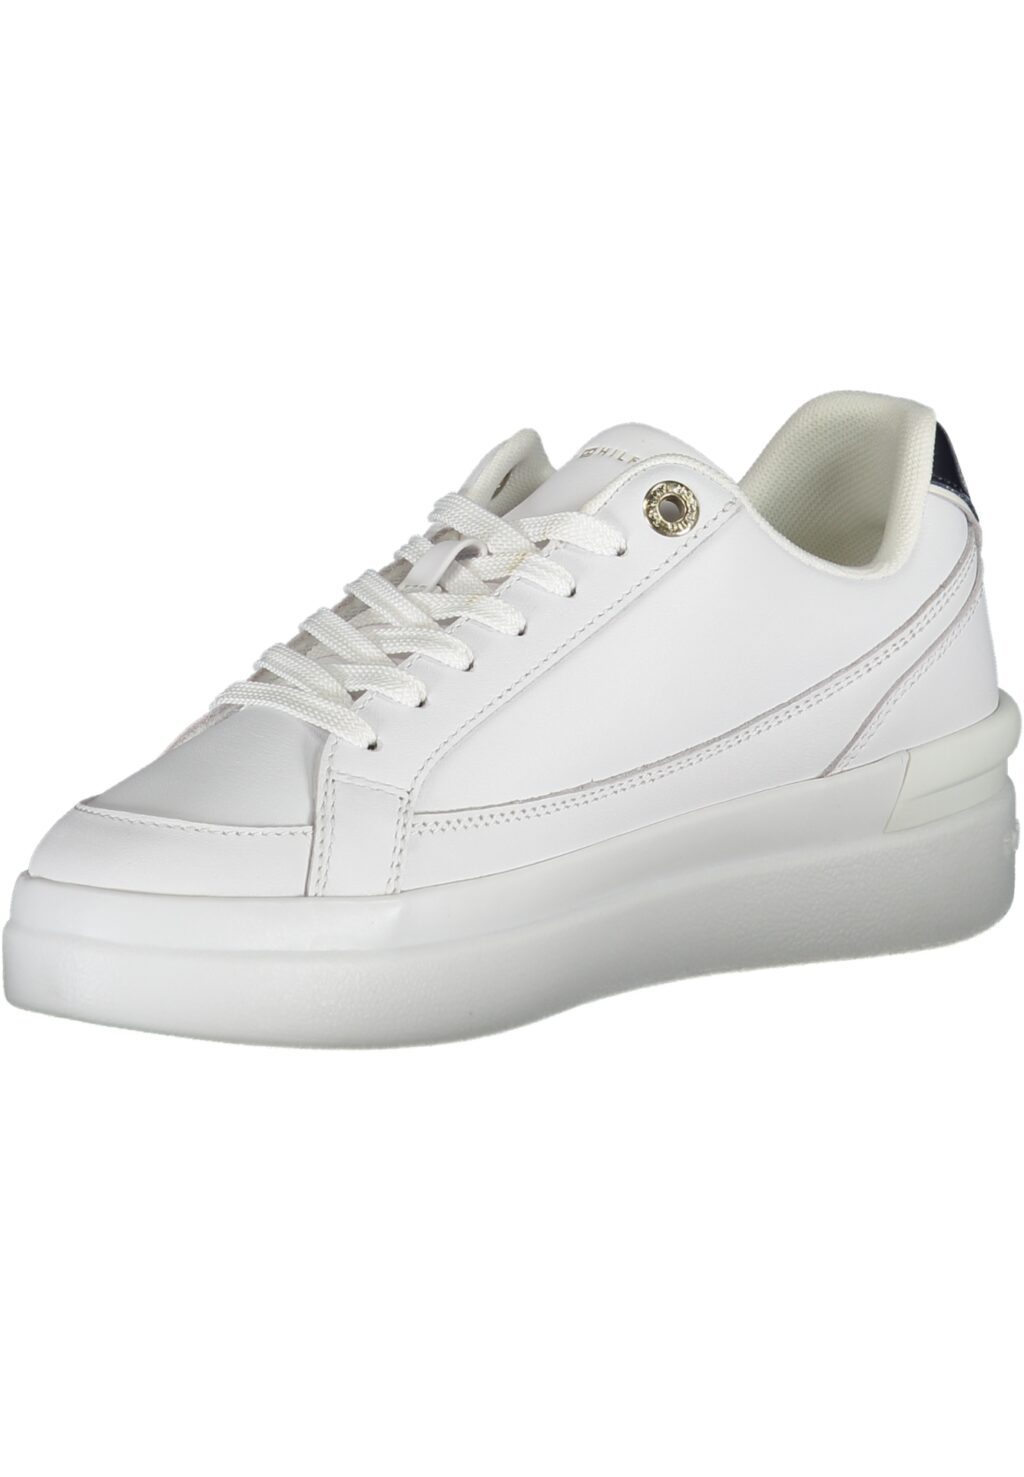 TOMMY HILFIGER WHITE WOMEN'S SPORTS SHOES FW0FW07568F_BIYBS